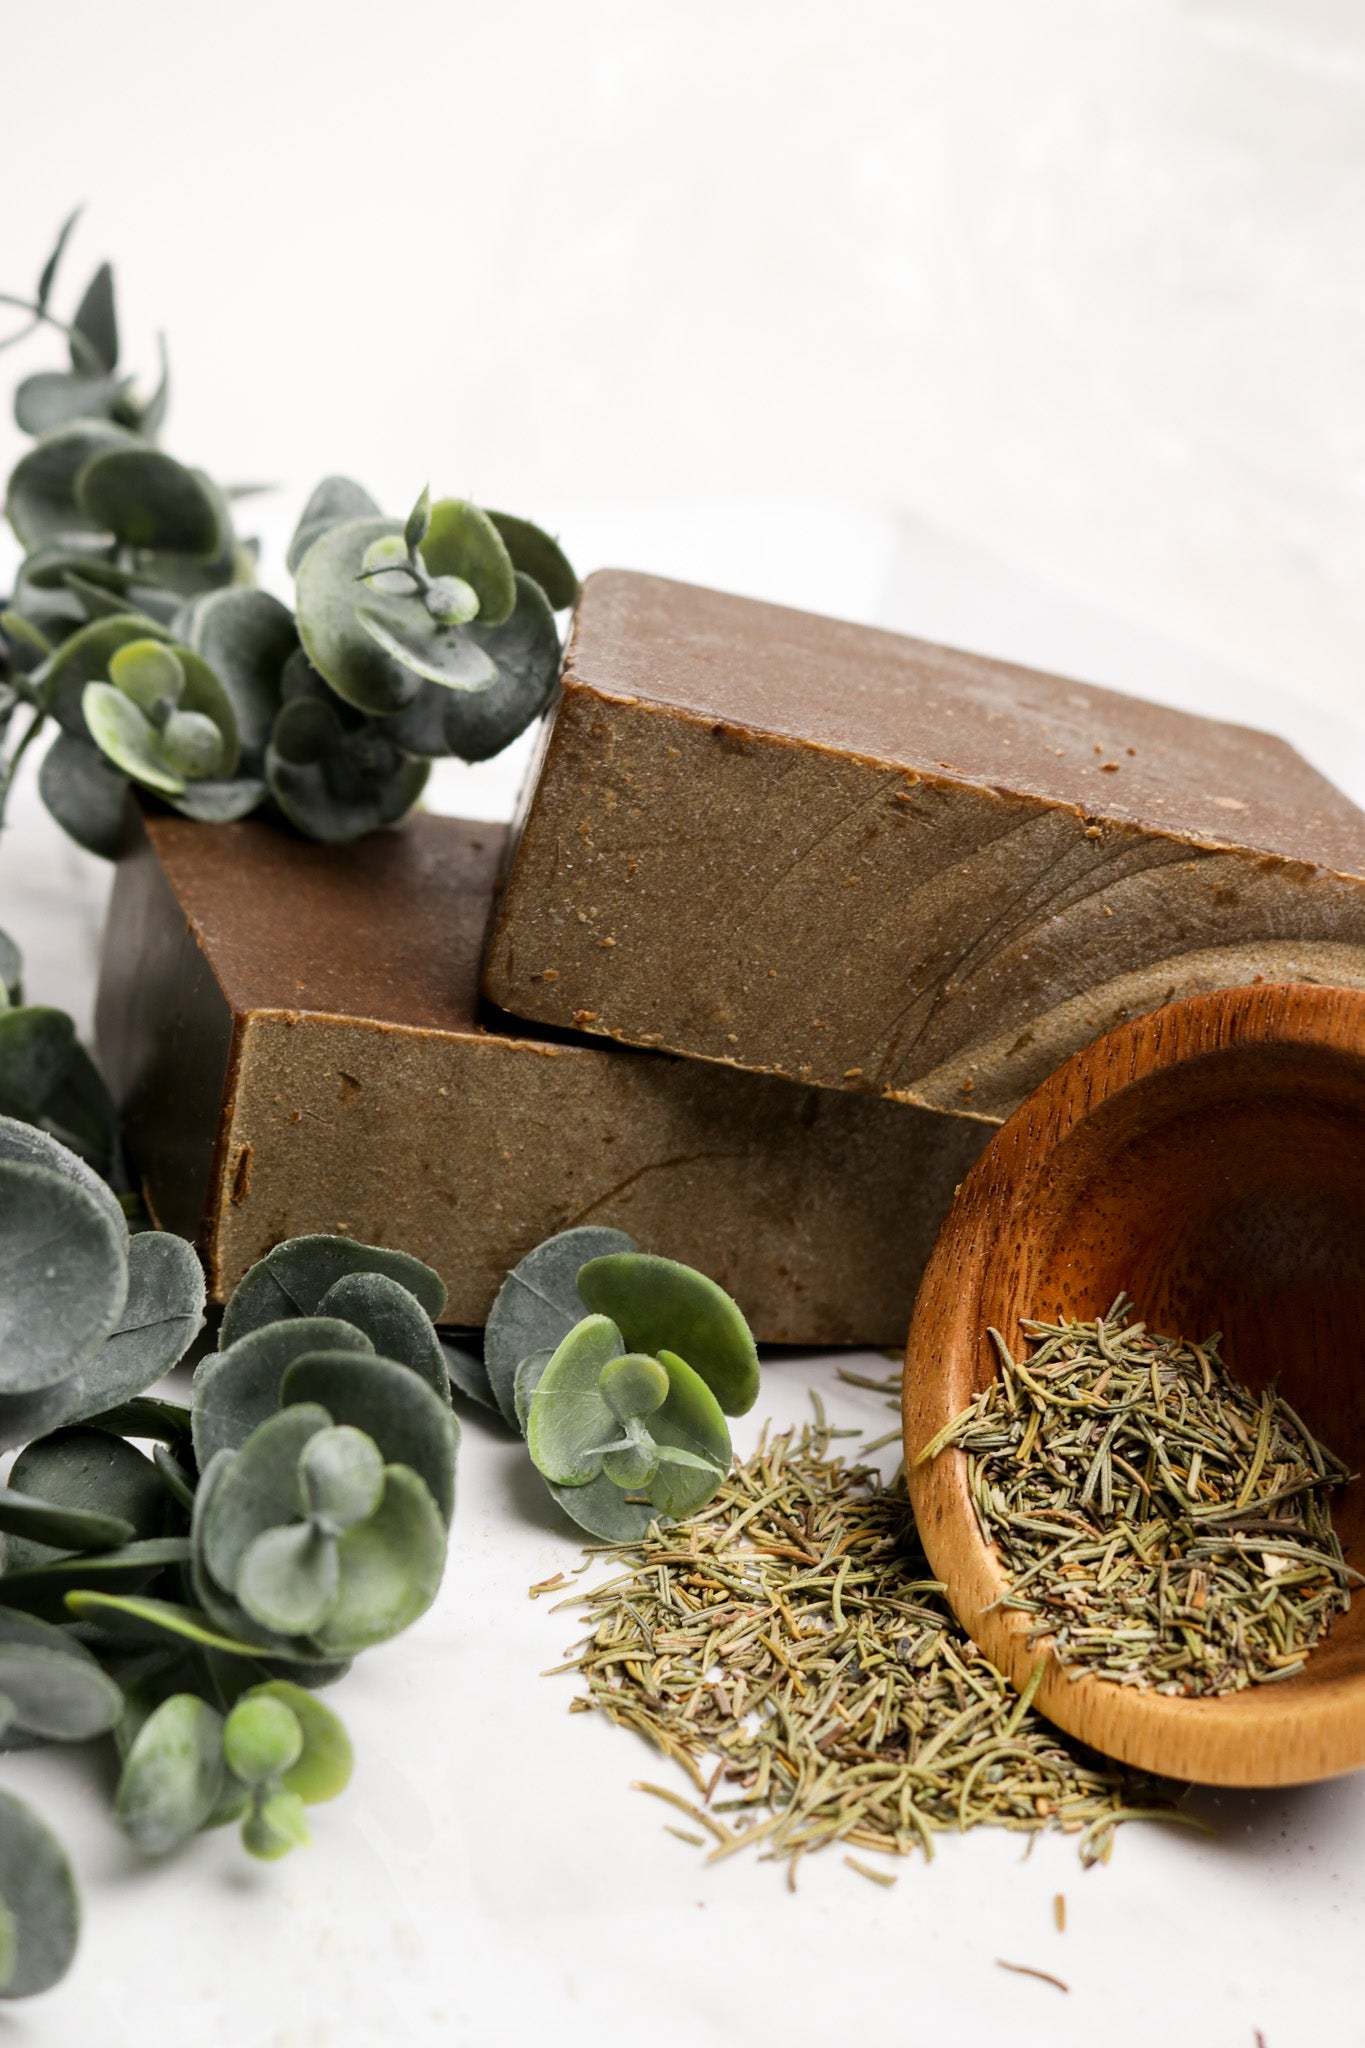 Introducing Sunny In Denbigh's NEW Eucalyptus & Rosemary Shampoo Bar. Our Eucalyptus & Rosemary shampoo is ideal for hair that's dry, brittle and damaged hair that won’t grow or retain moisture. Made with the finest herbs and is perfect for restoring health of your hair!